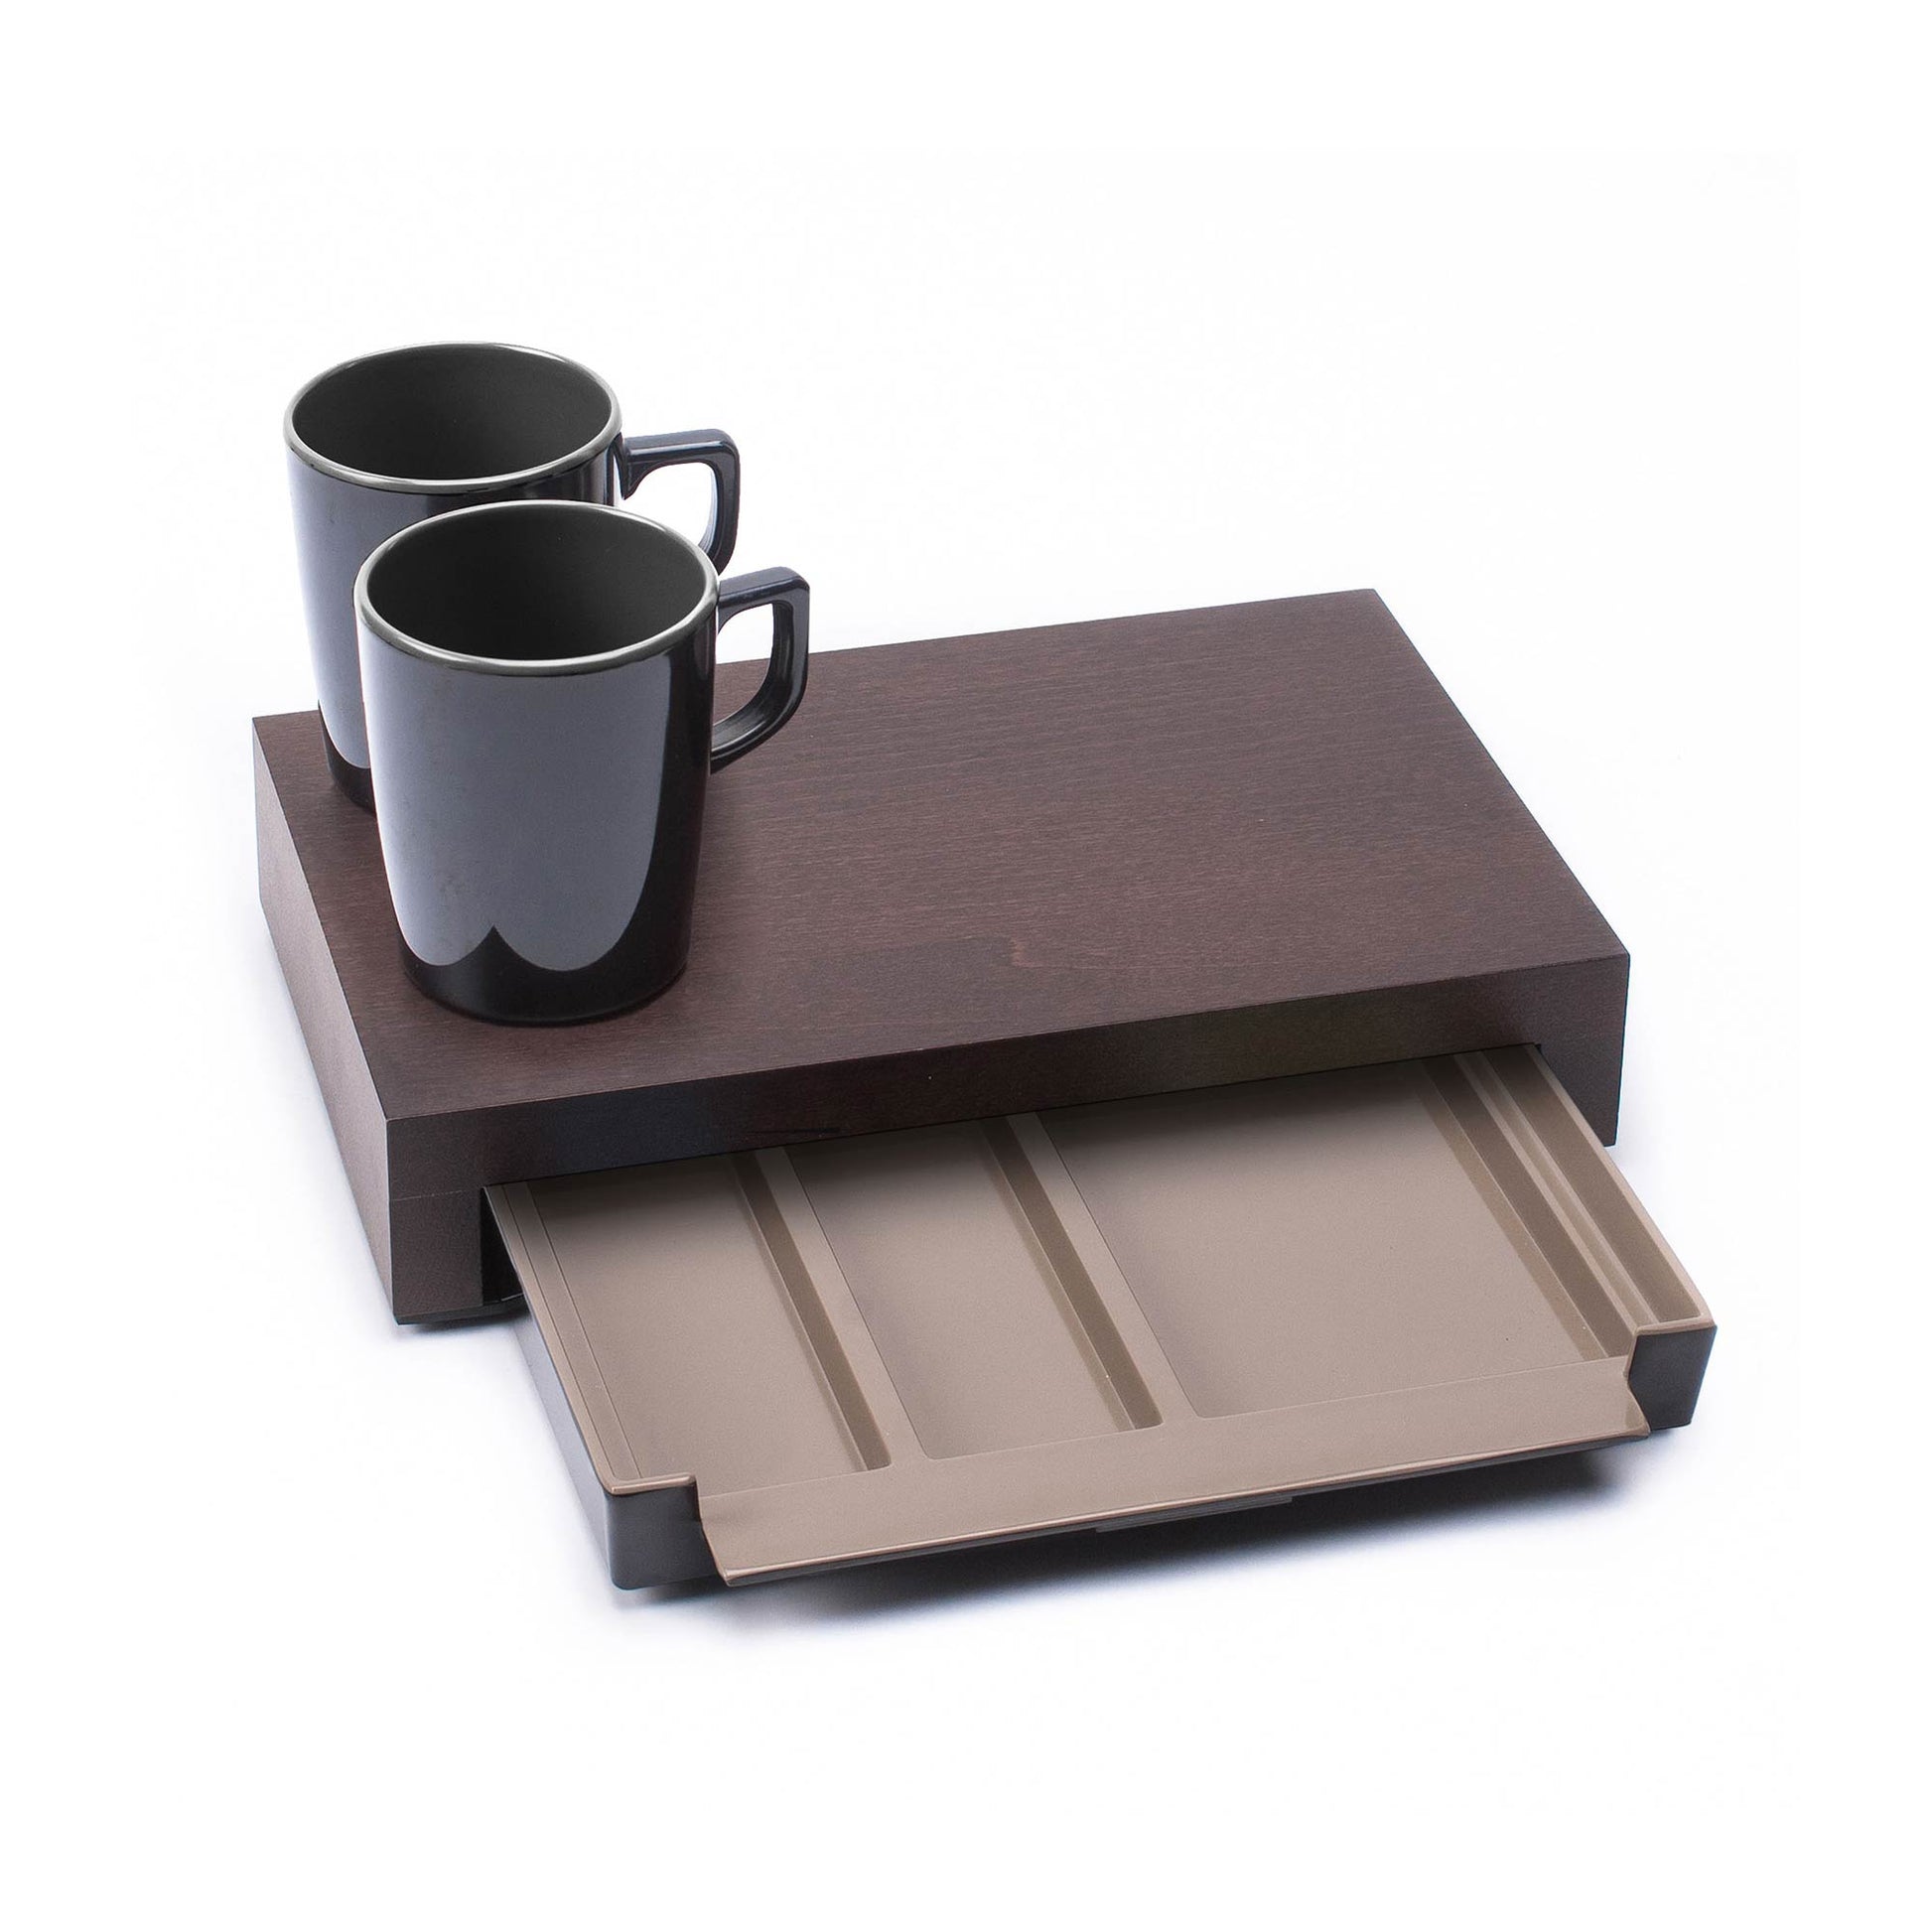 Bentley Canella mahogany welcome tray with mugs